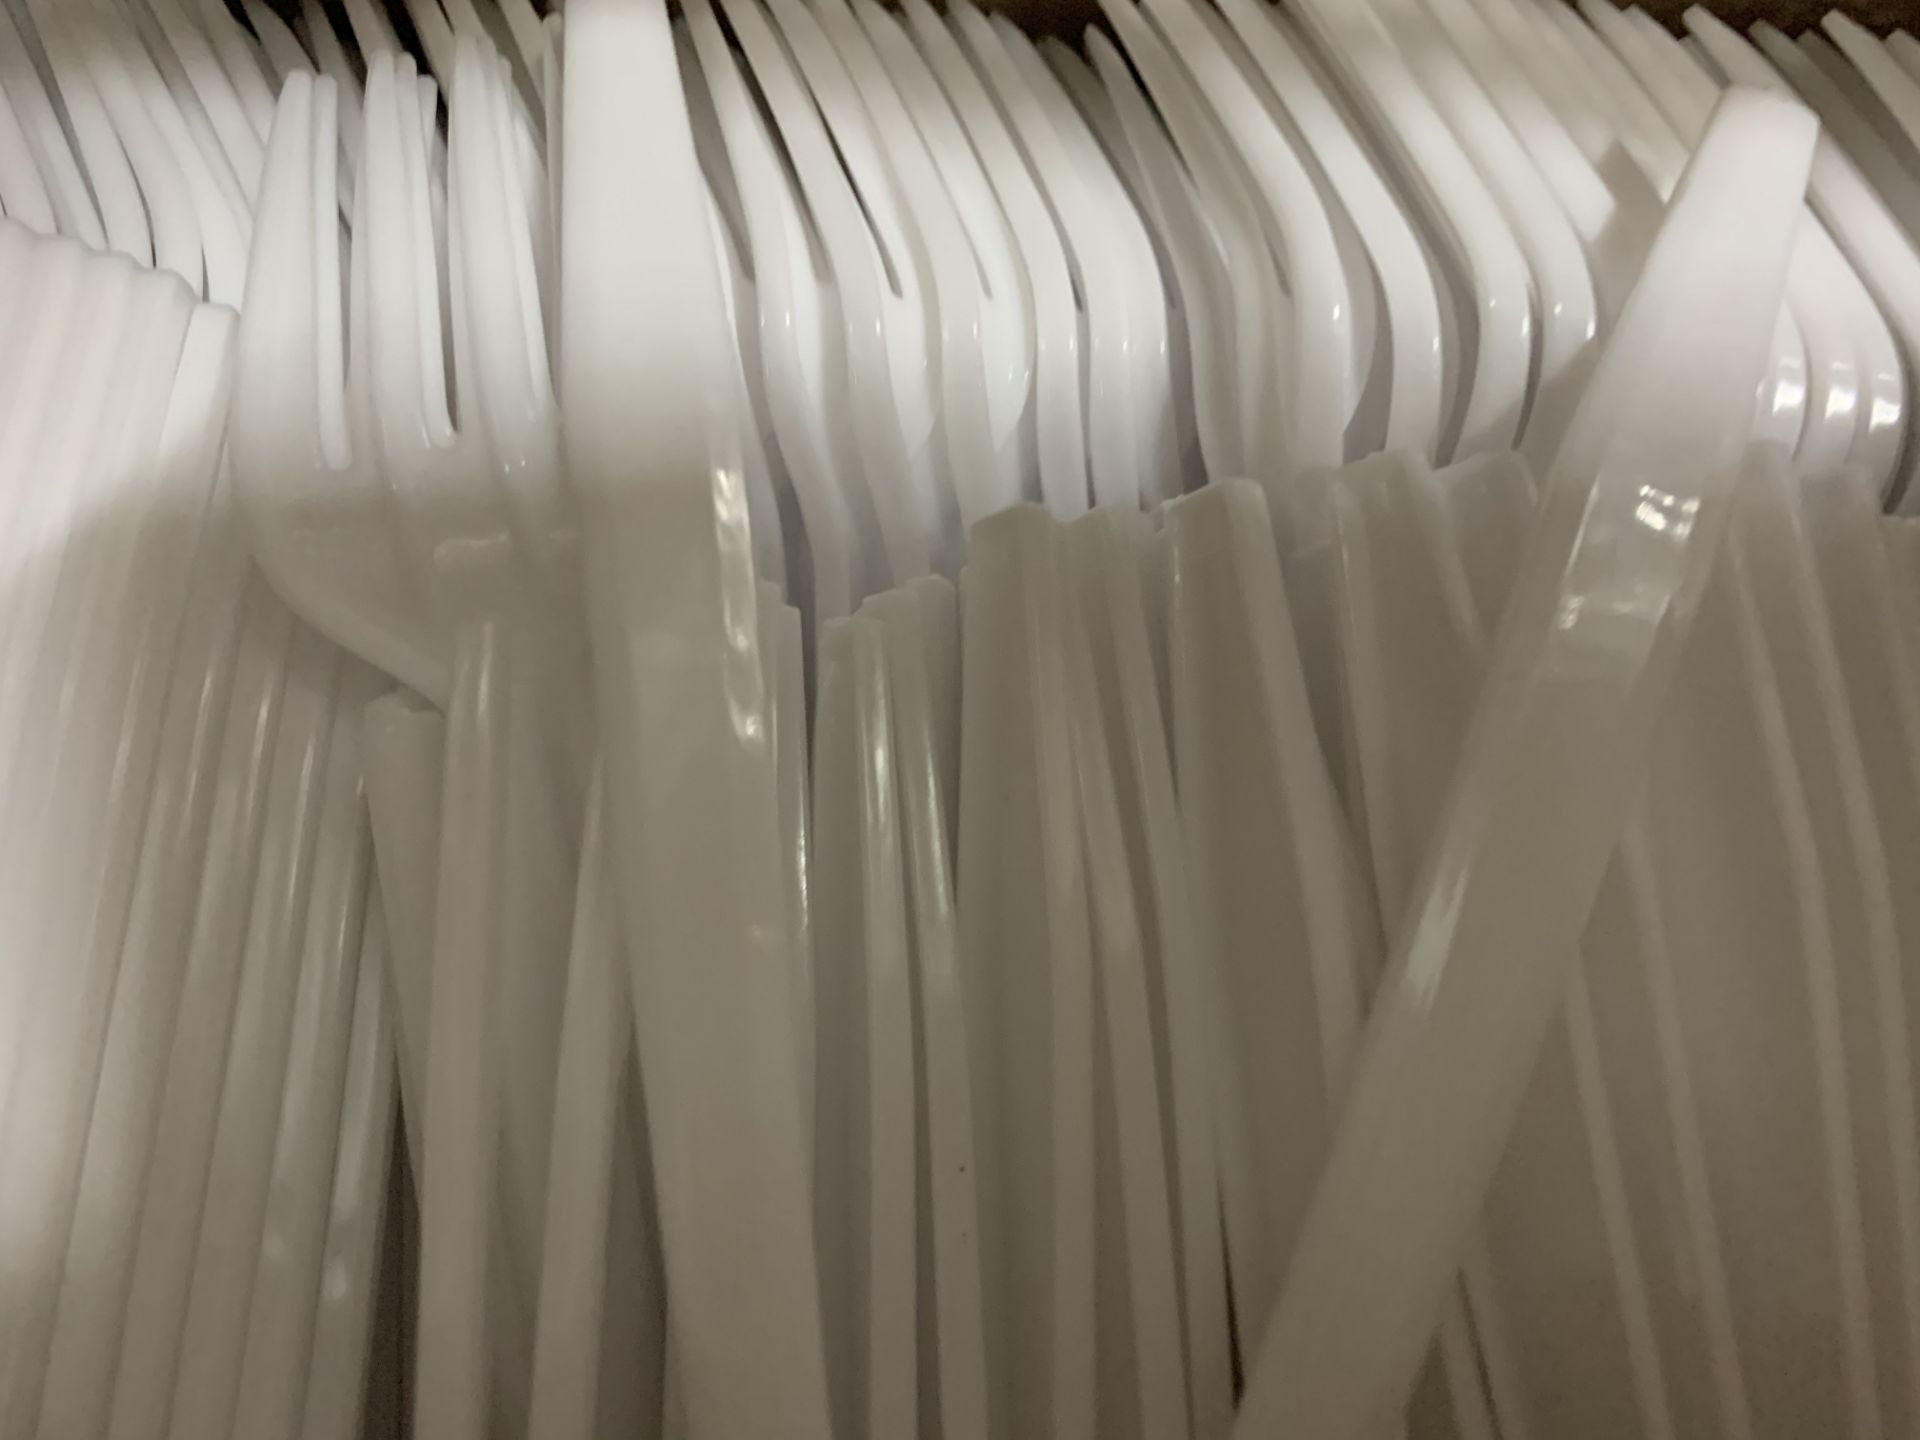 2 x Boxes of 1000 Mini Forks by 888 Gastro Disposables | DSP3 - Image 4 of 5